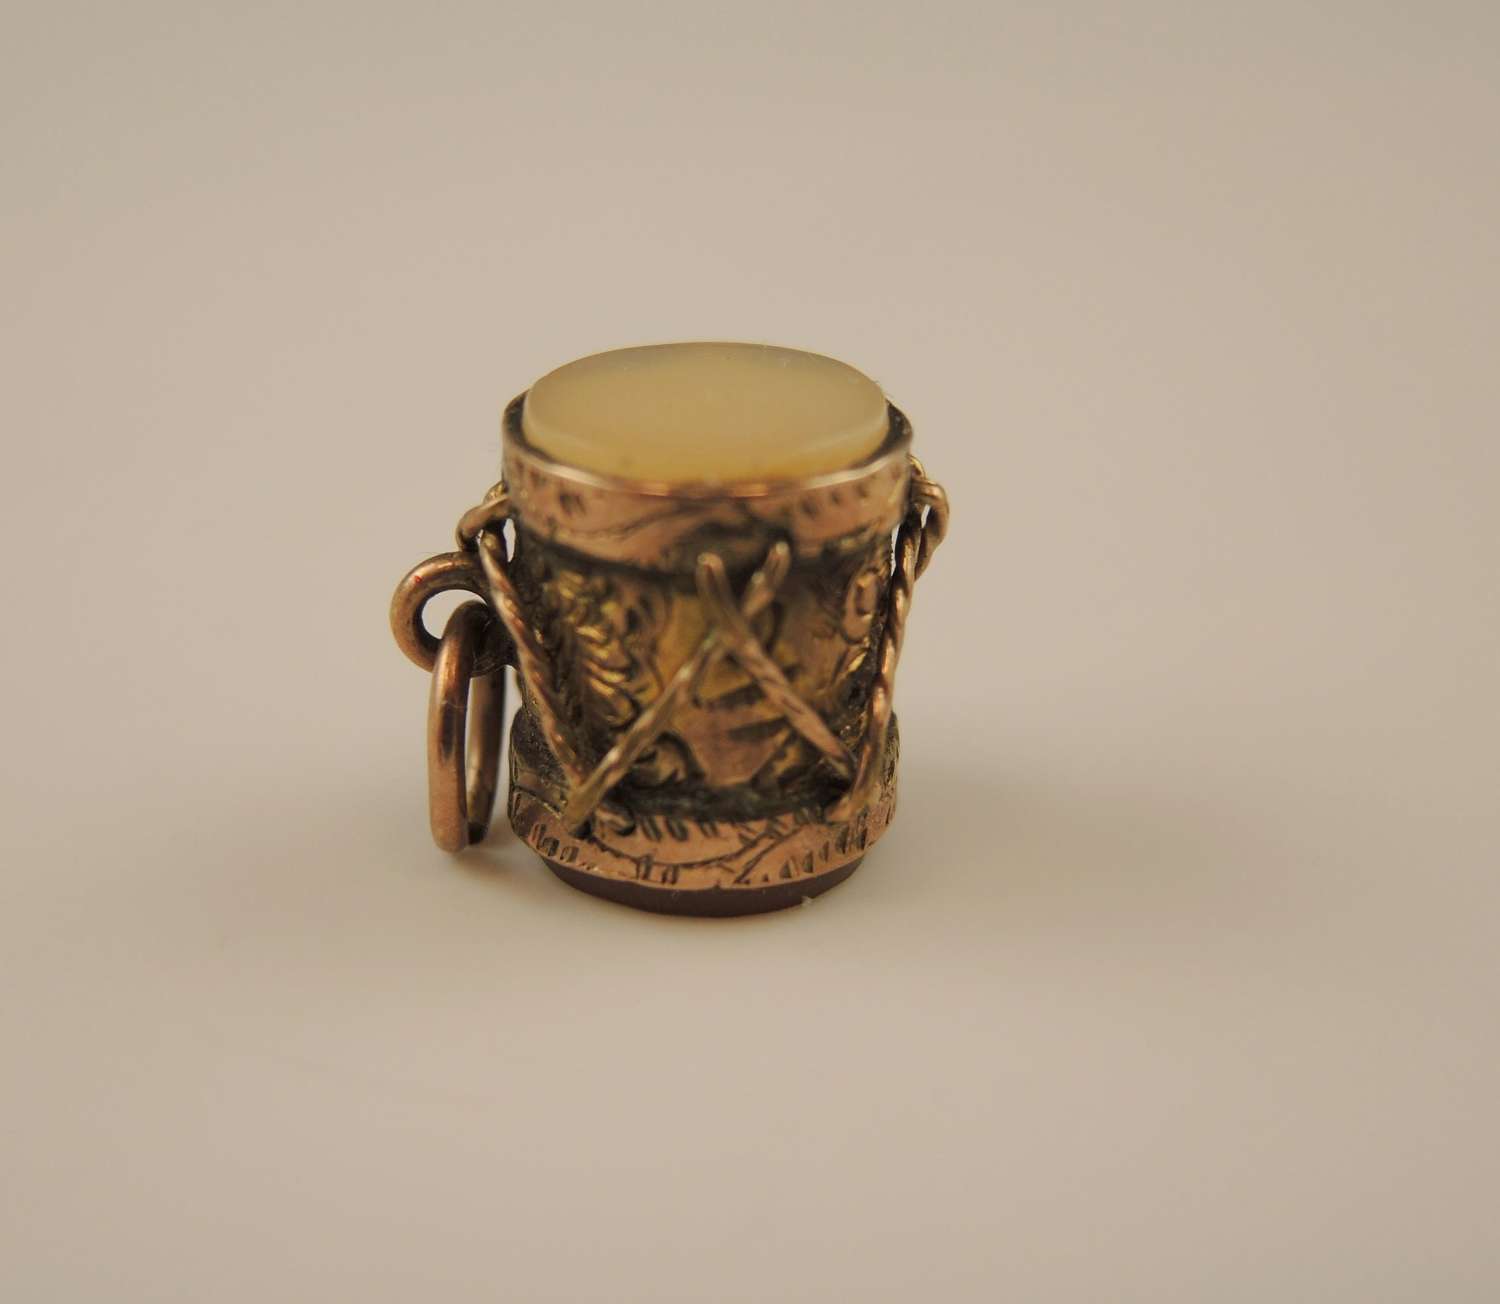 Georgian charm of a SNARE DRUM c1810